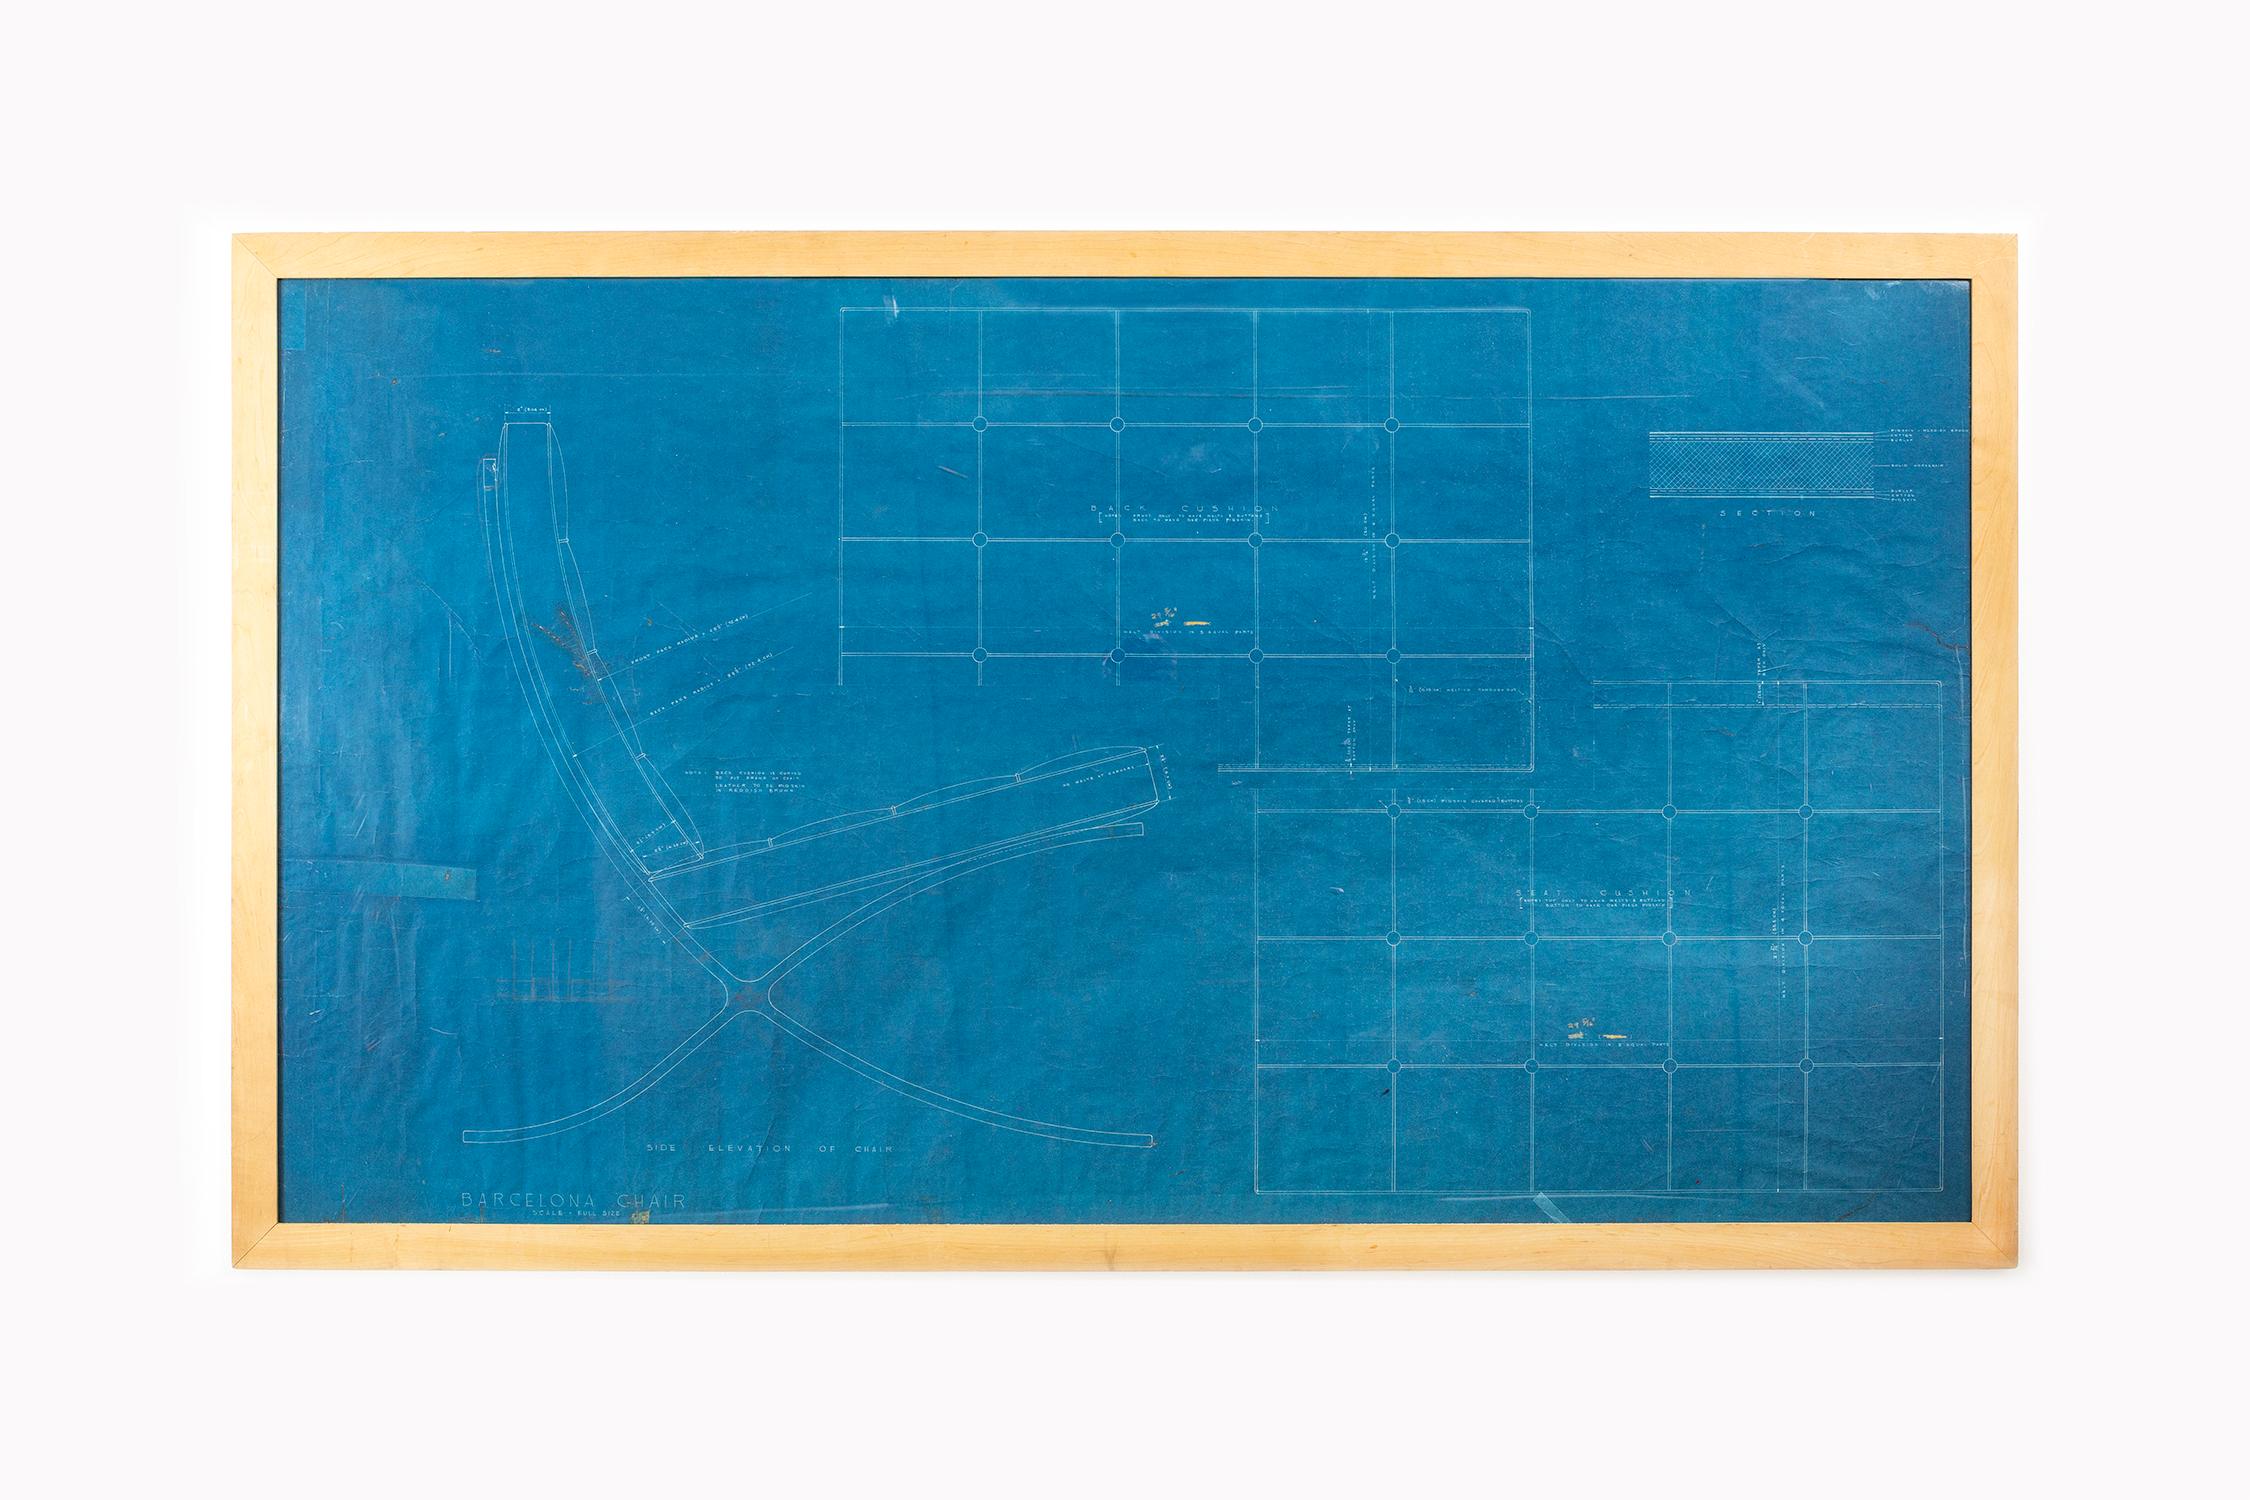 Mies van der Rohe Blueprint, One Charles Center, Baltimore 1961, Elevations  3